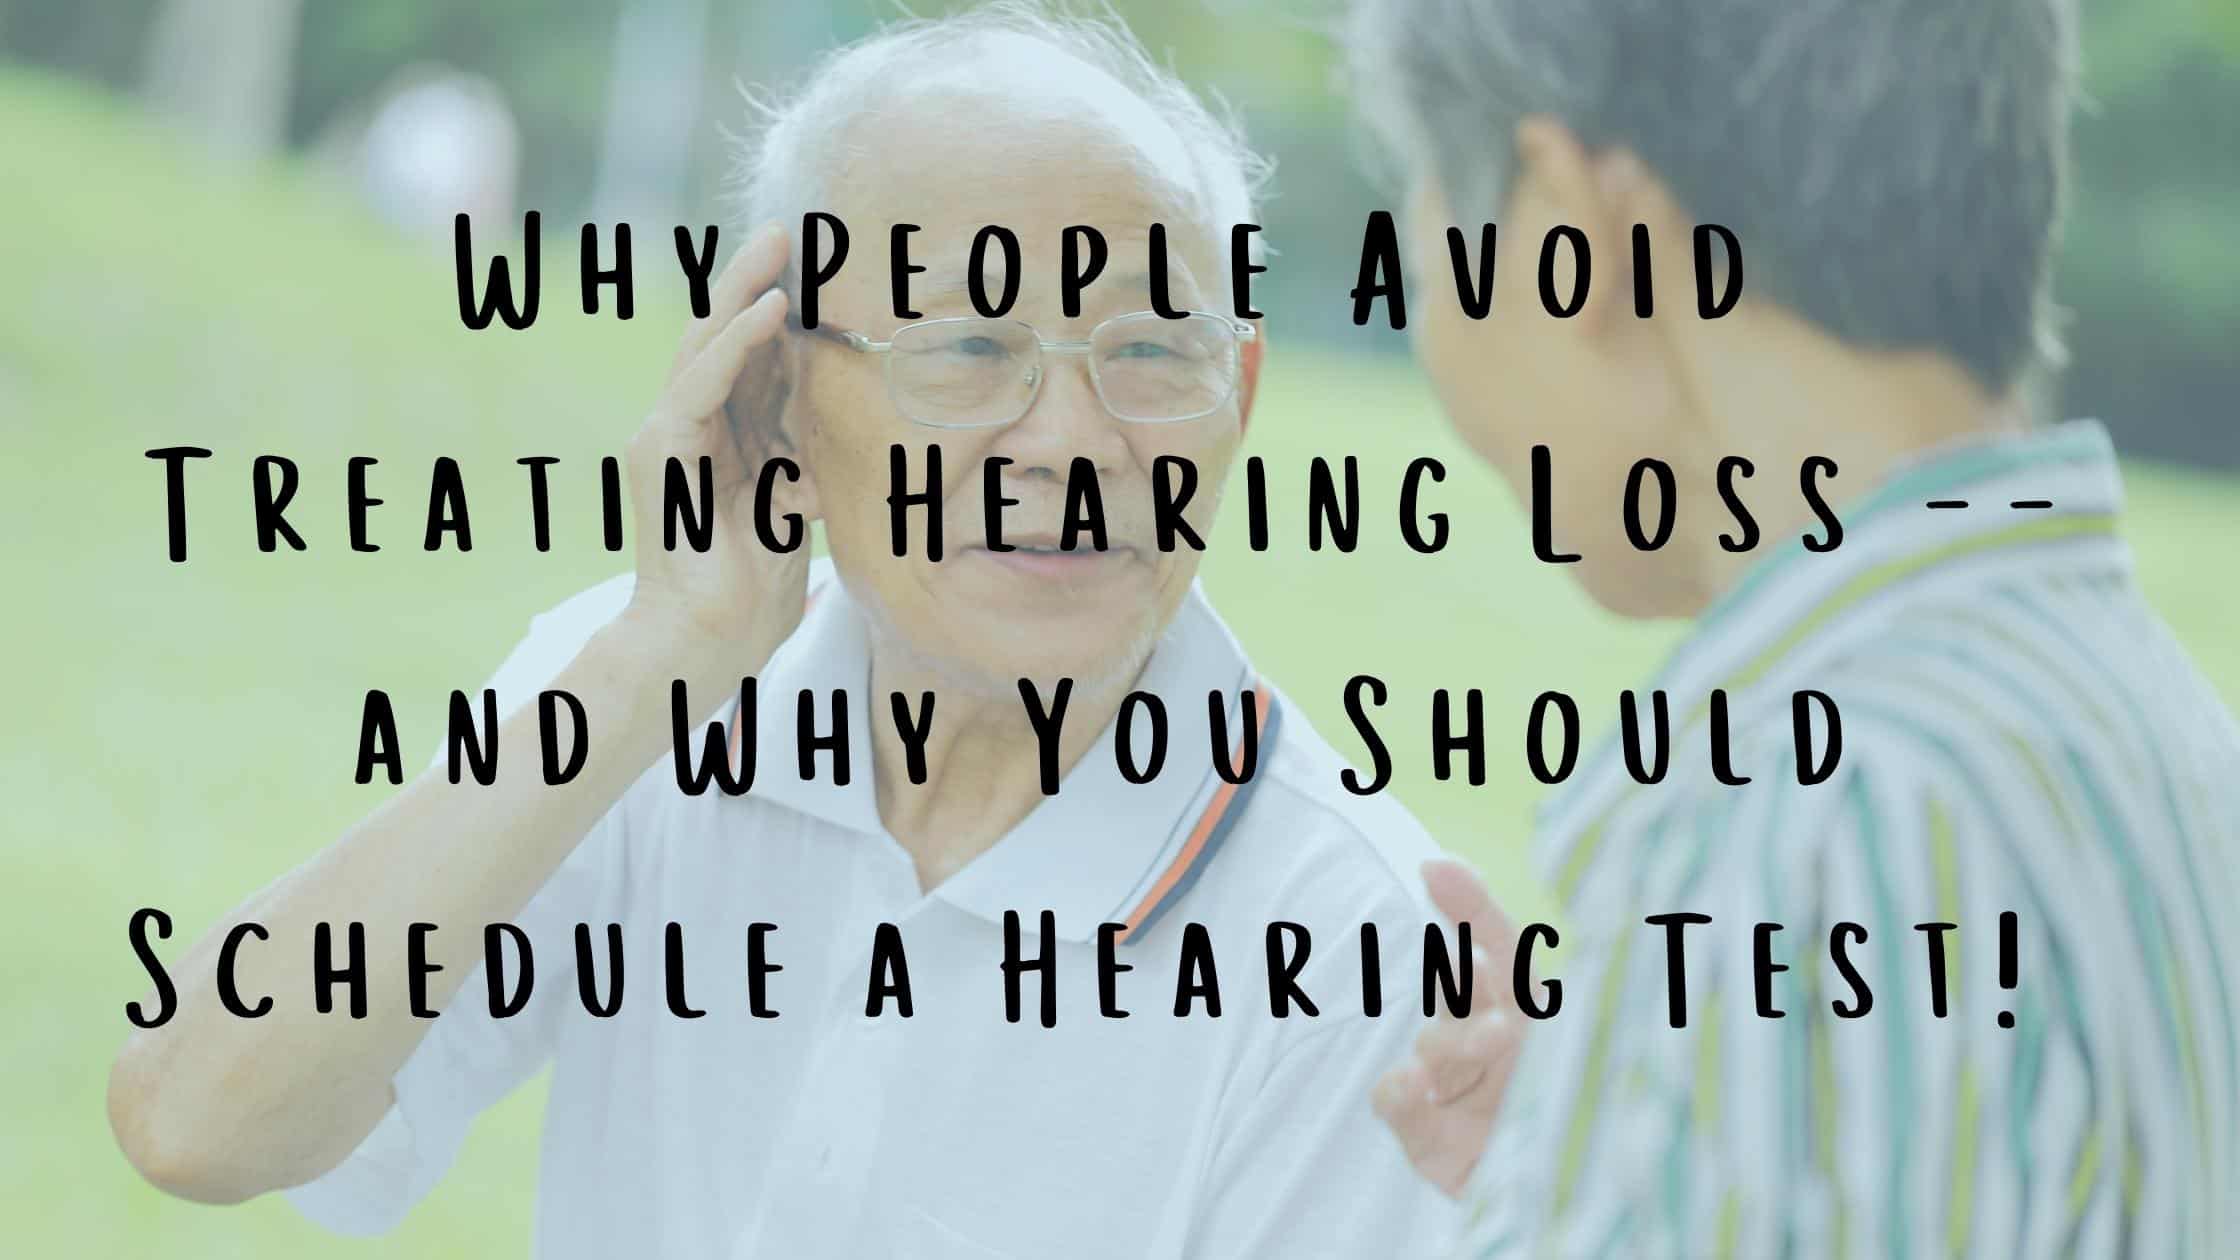 Why People Avoid Treating Hearing Loss -- and Why You Should Schedule a Hearing Test!